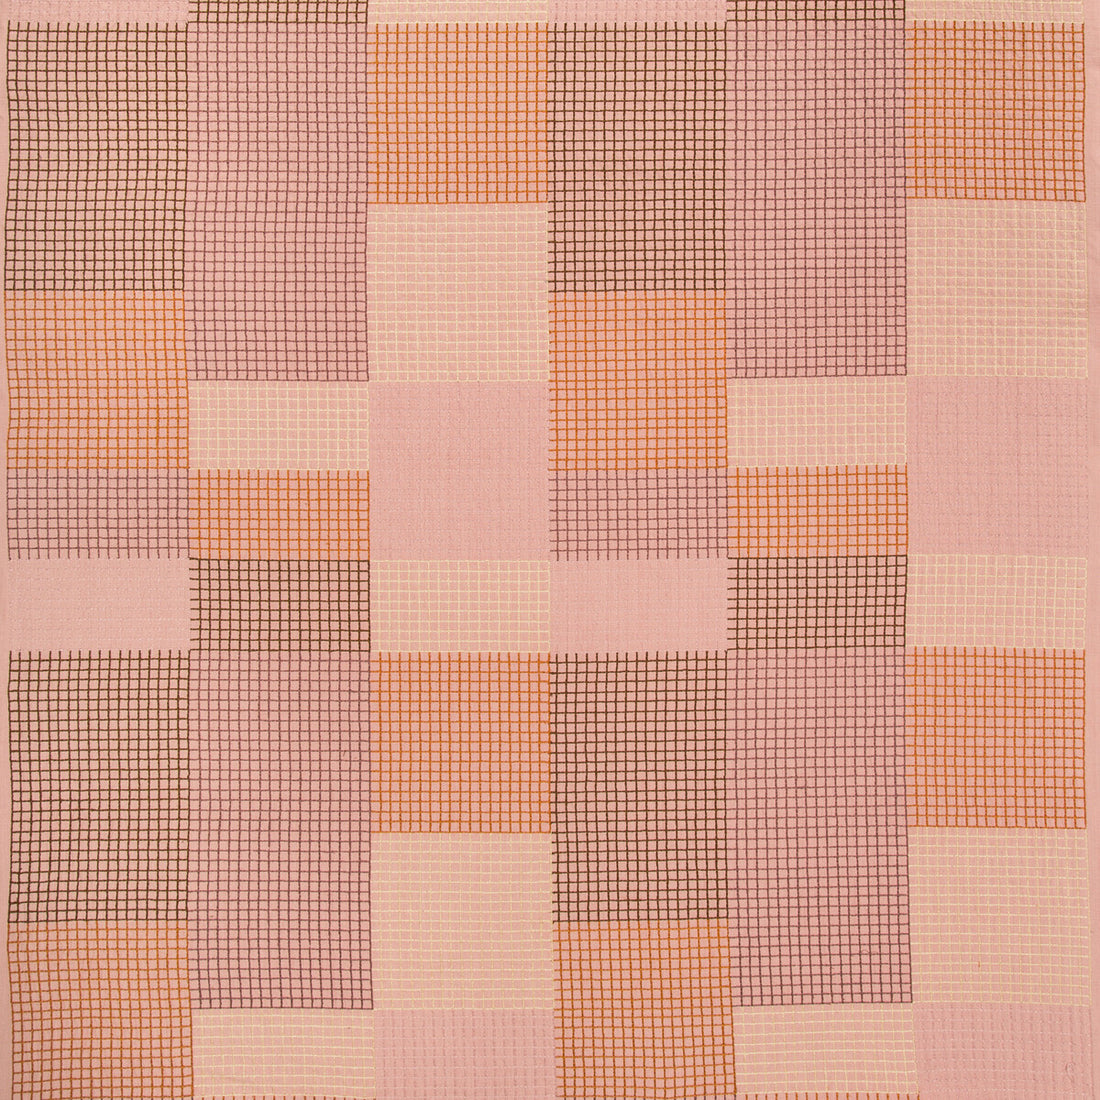 Gridlock fabric in cinnamon color - pattern GWF-3756.179.0 - by Lee Jofa Modern in the Kelly Wearstler V collection